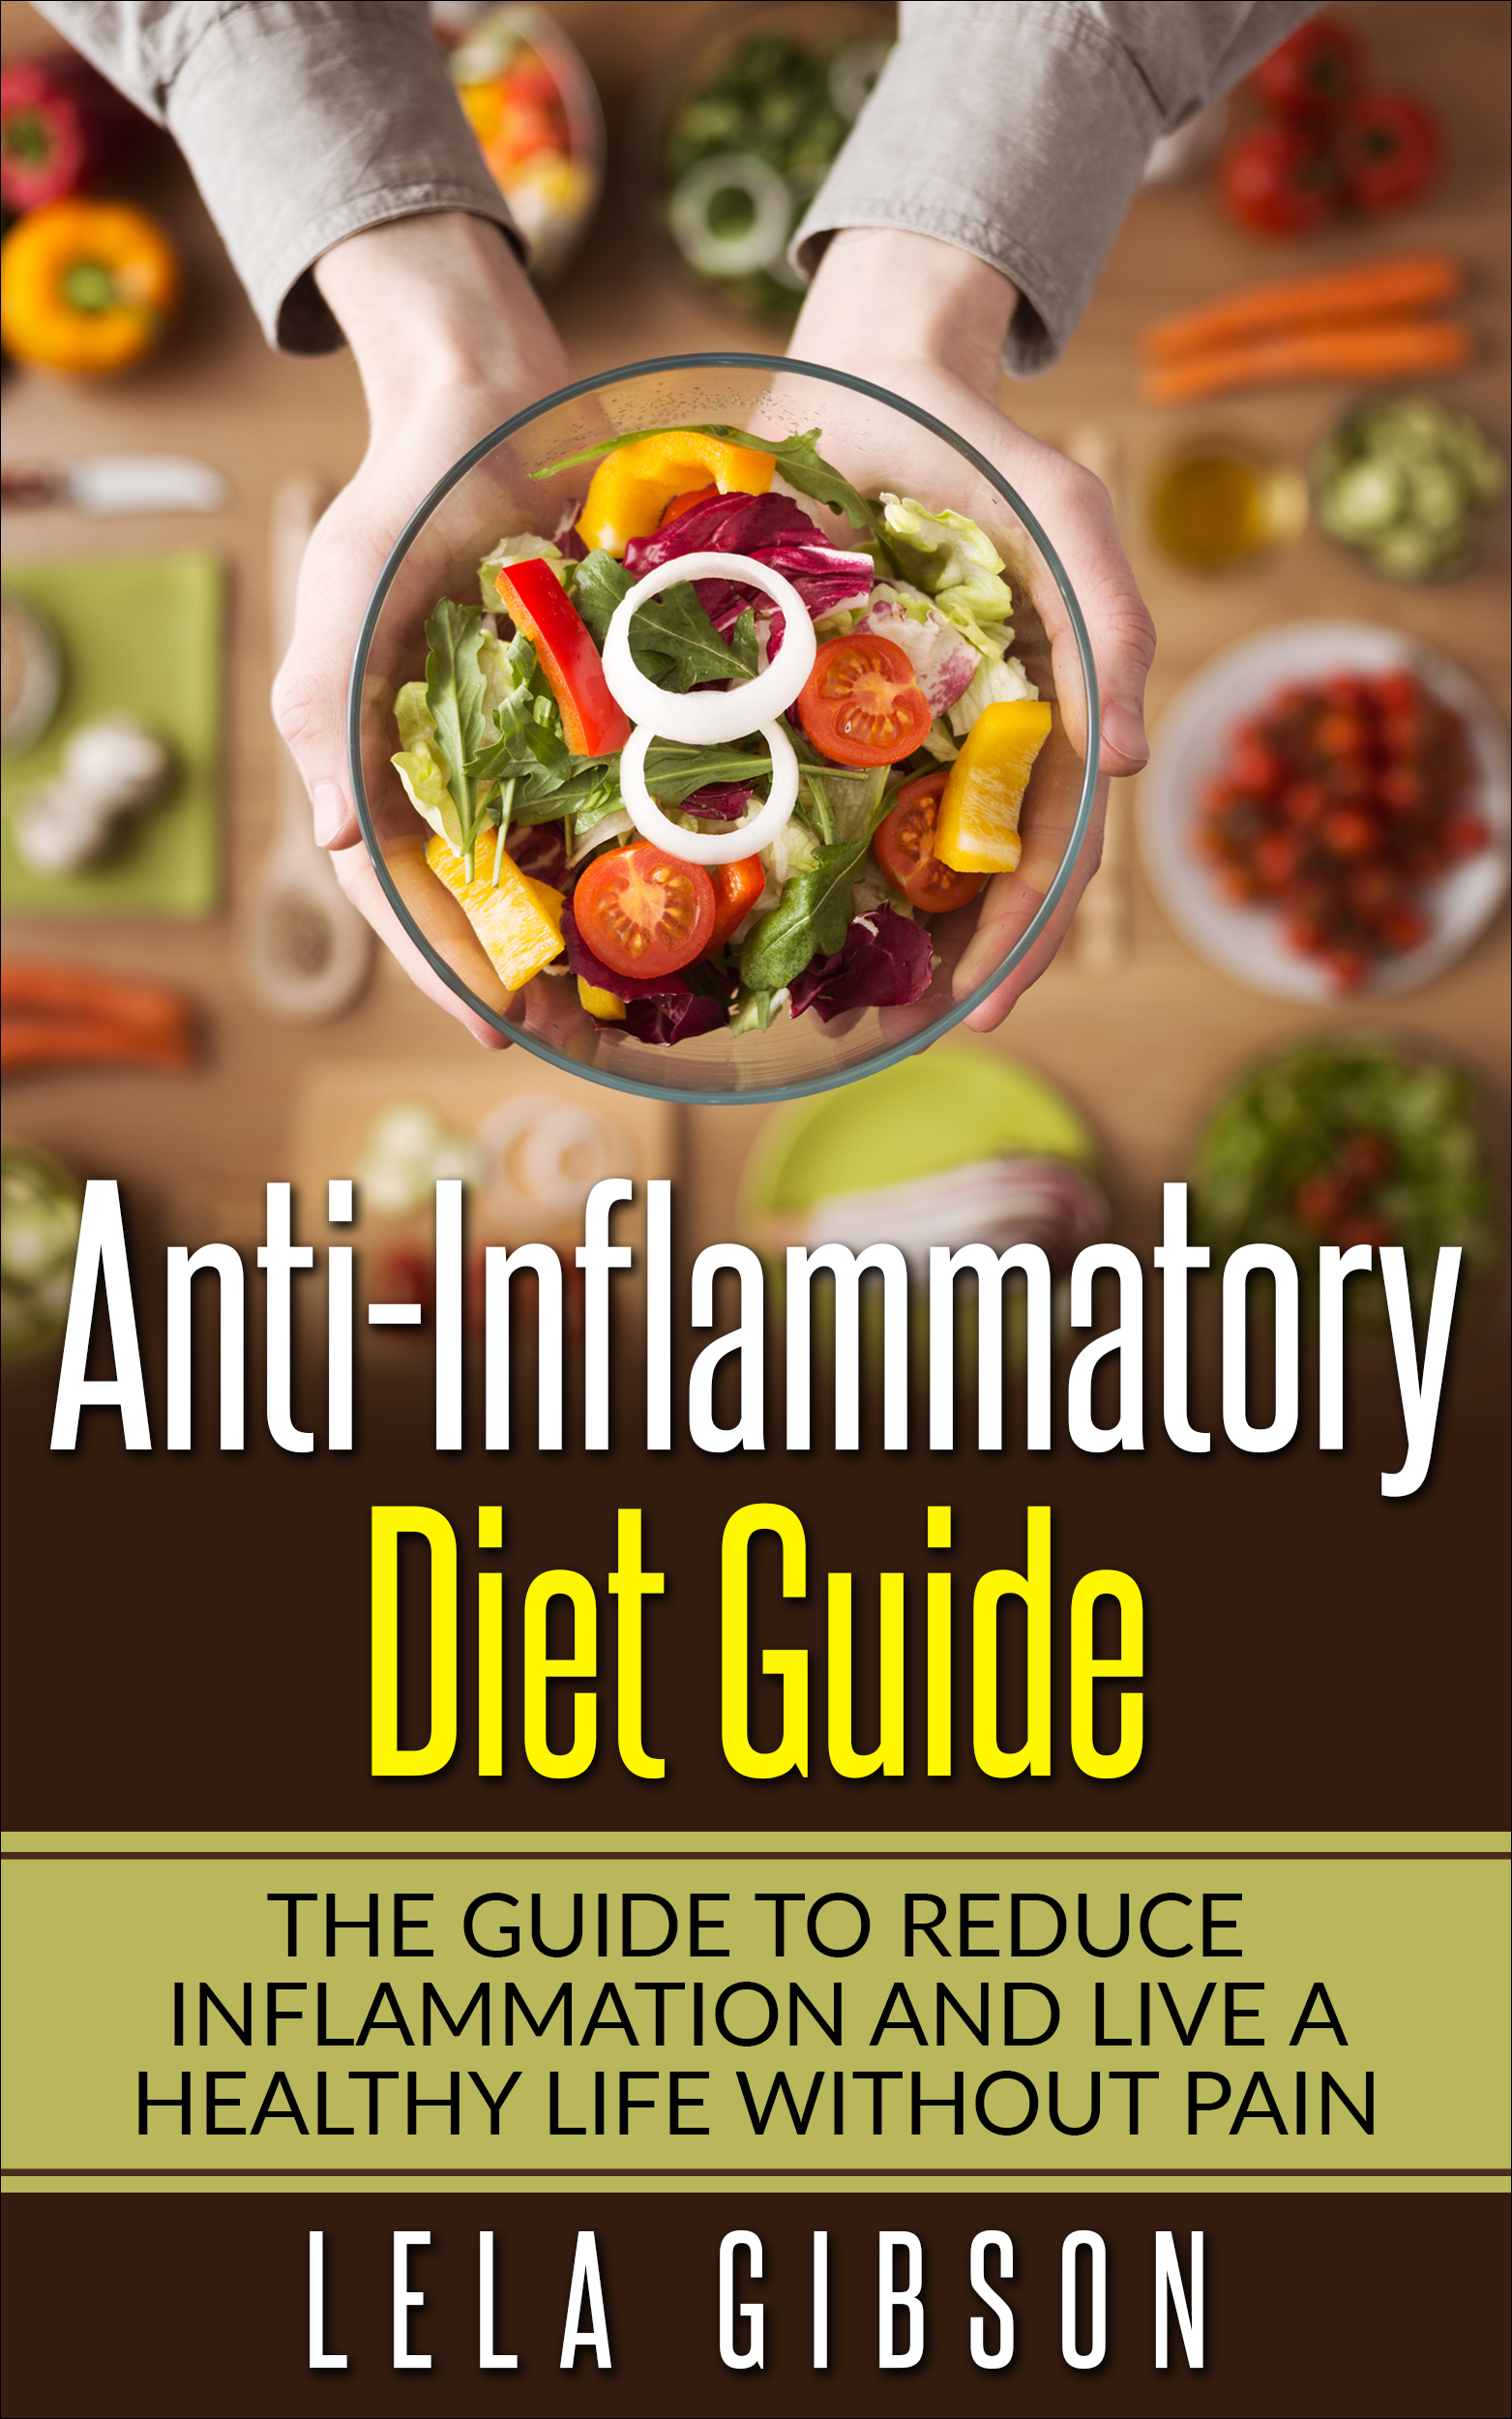 FREE: Anti-Inflammatory Diet Guide: The Guide To Reduce Inflammation And Live A Healthy Life Without Pain by Lela Gibson